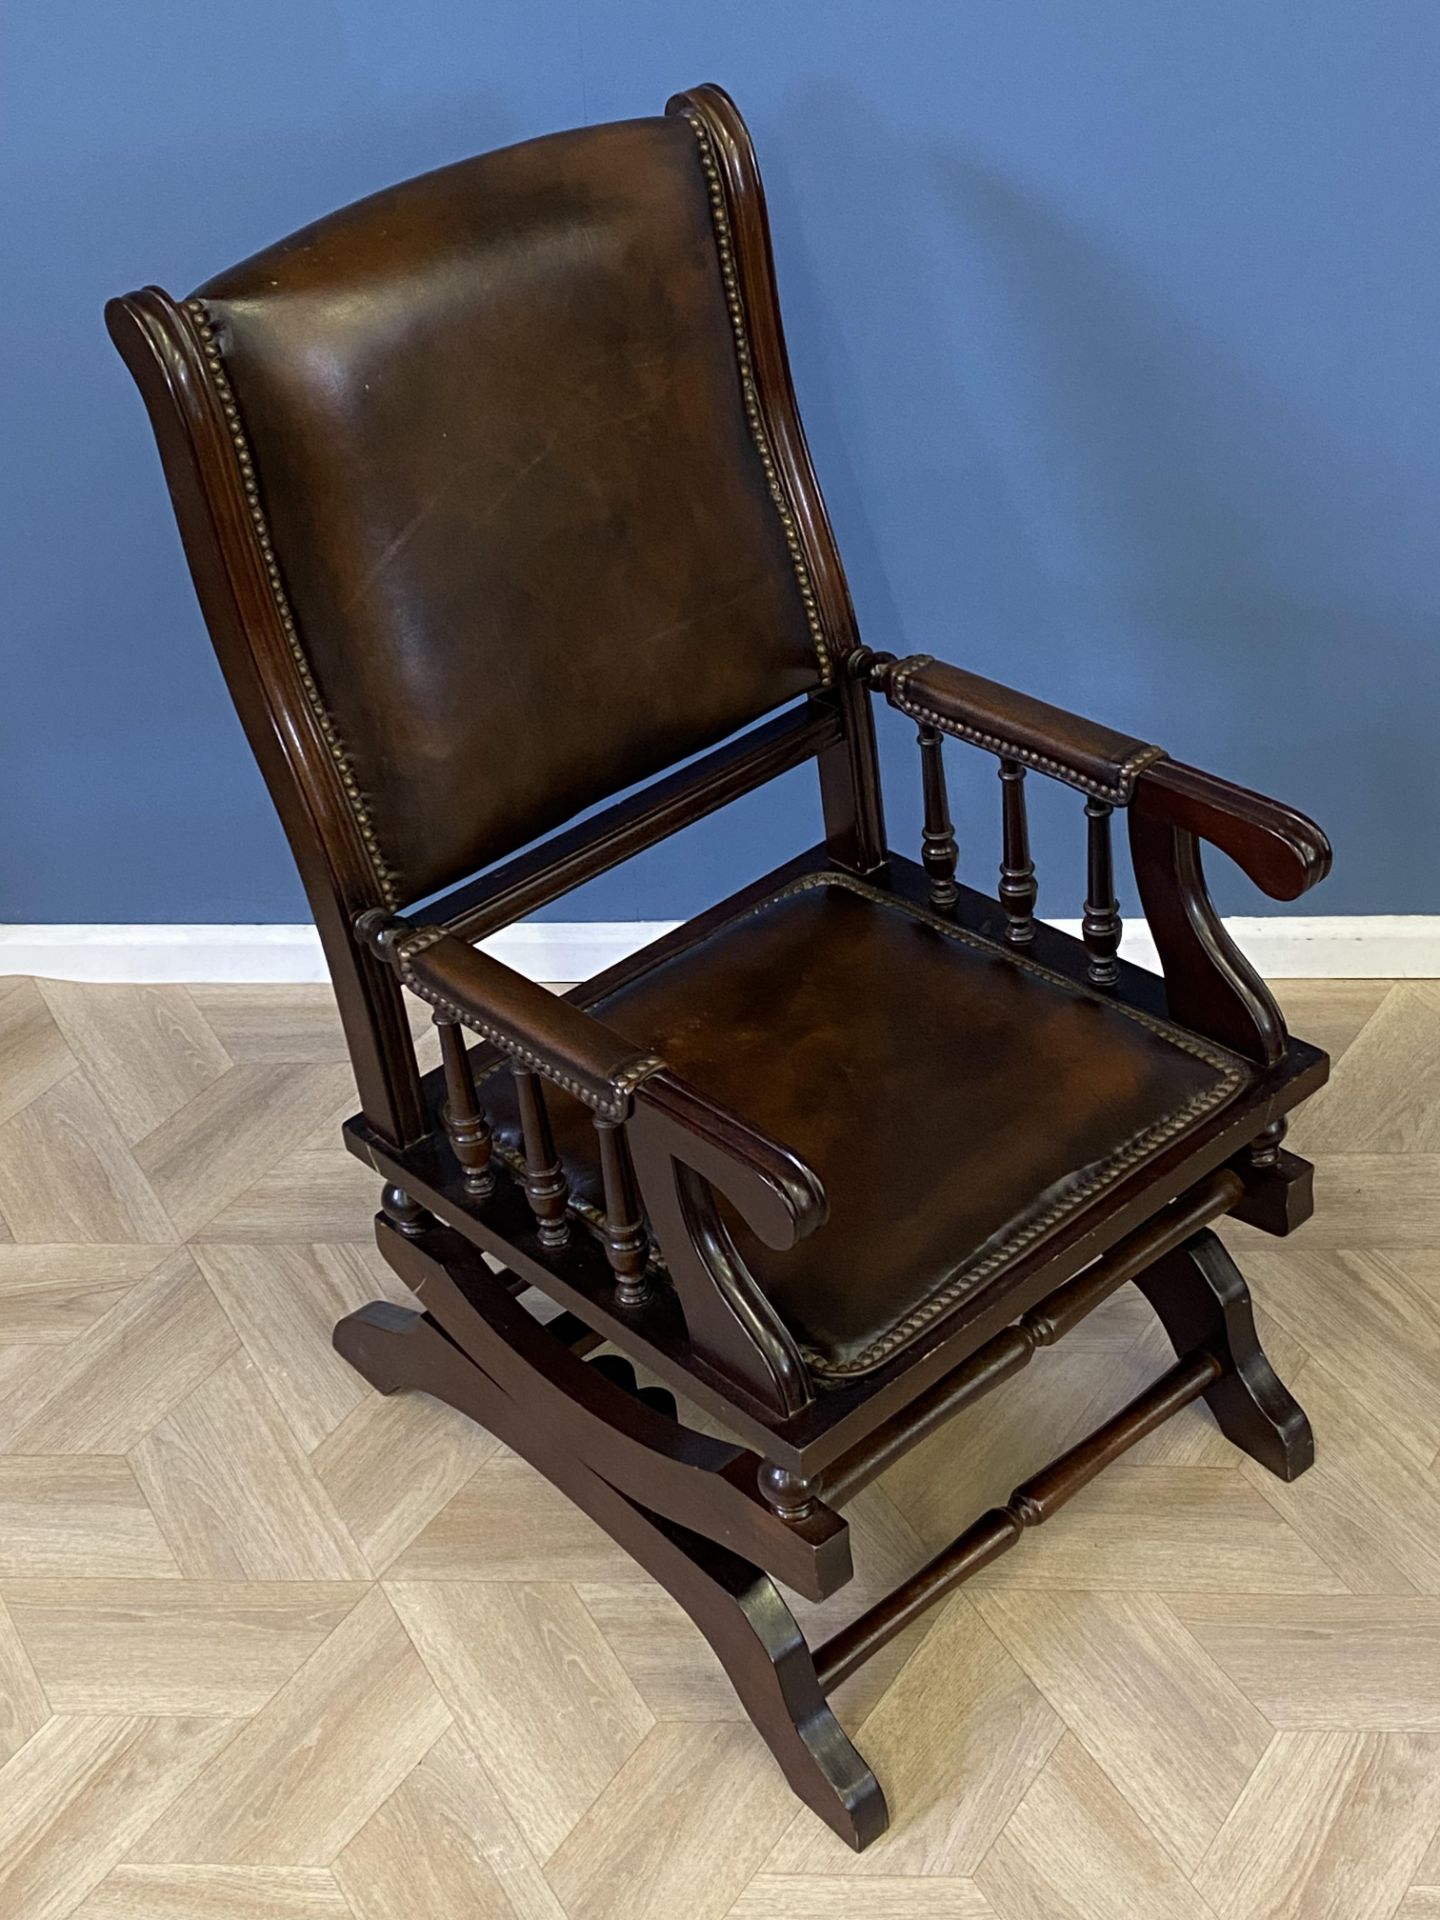 Mahogany framed leather rocking chair - Image 4 of 8